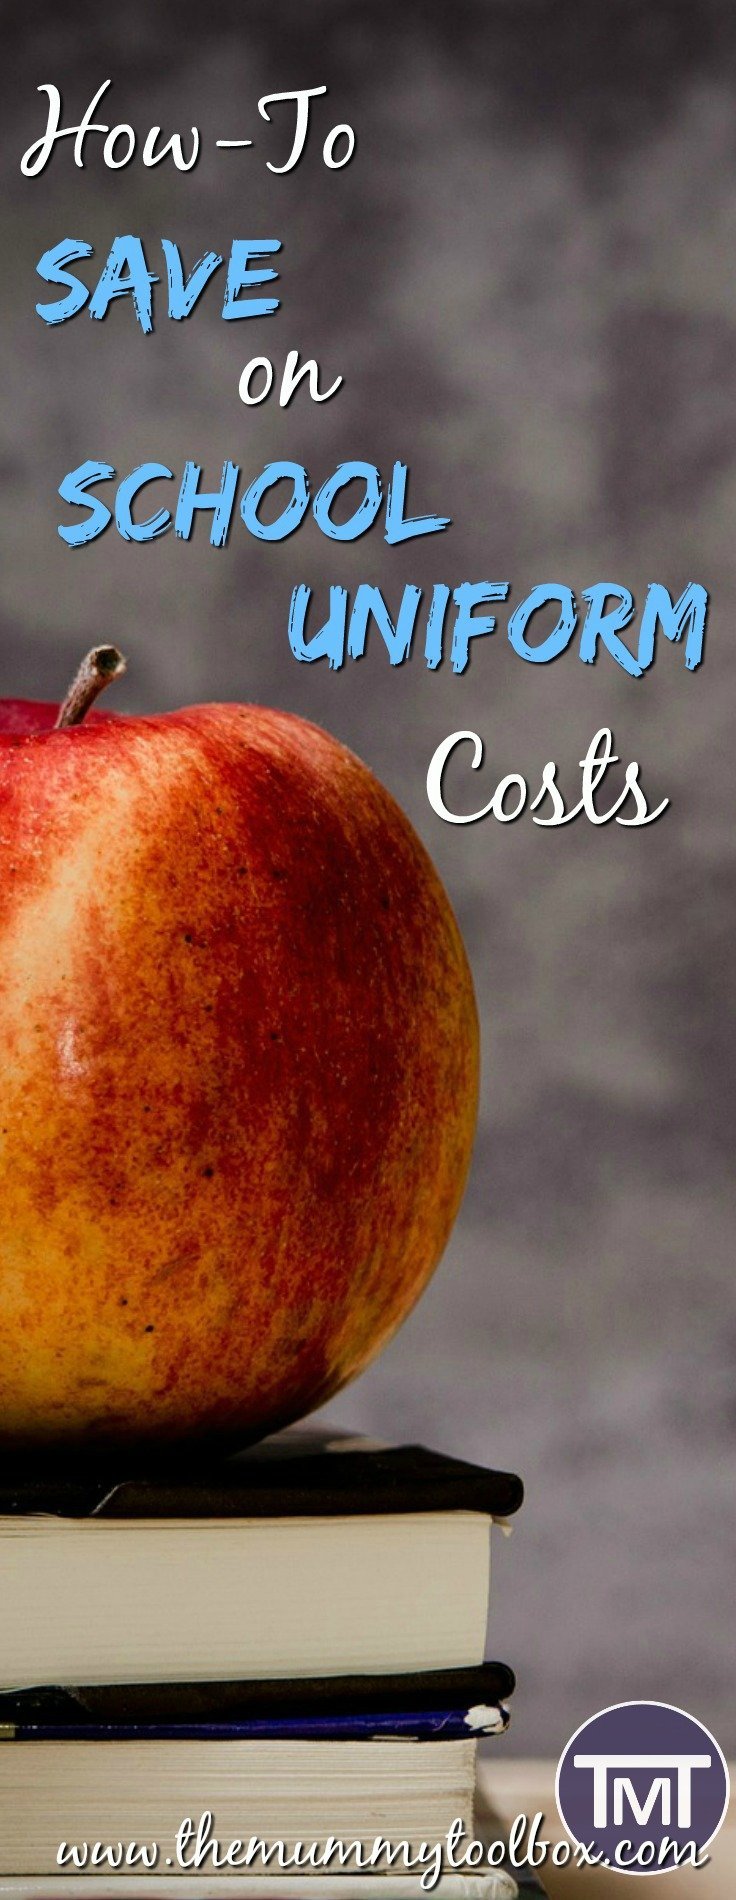 The best places to buy school uniforms to save money when you're broke or if you are strapped for cash! and how best to save on school uniform costs